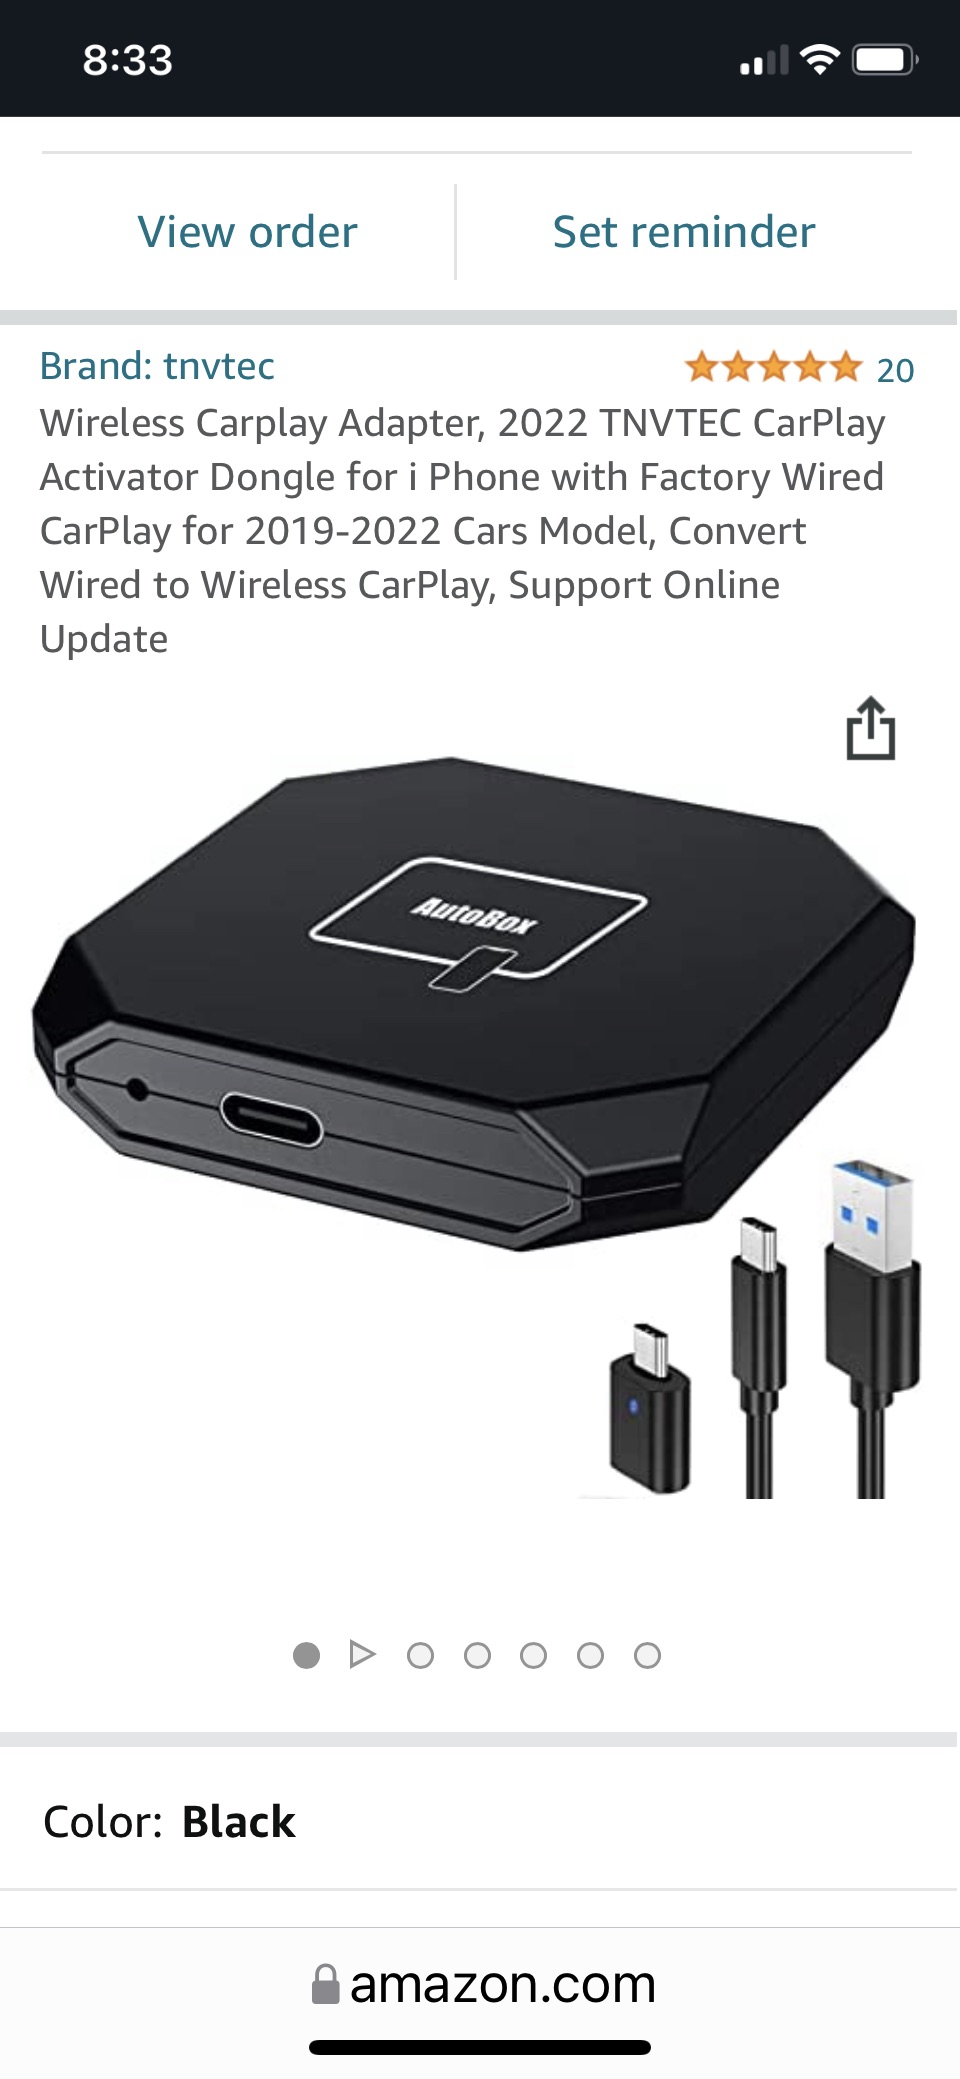 Review of wireless adapters for Apple car Play/Android Auto?   MaverickTruckClub - 2022+ Ford Maverick Pickup Forum, News, Owners,  Discussions